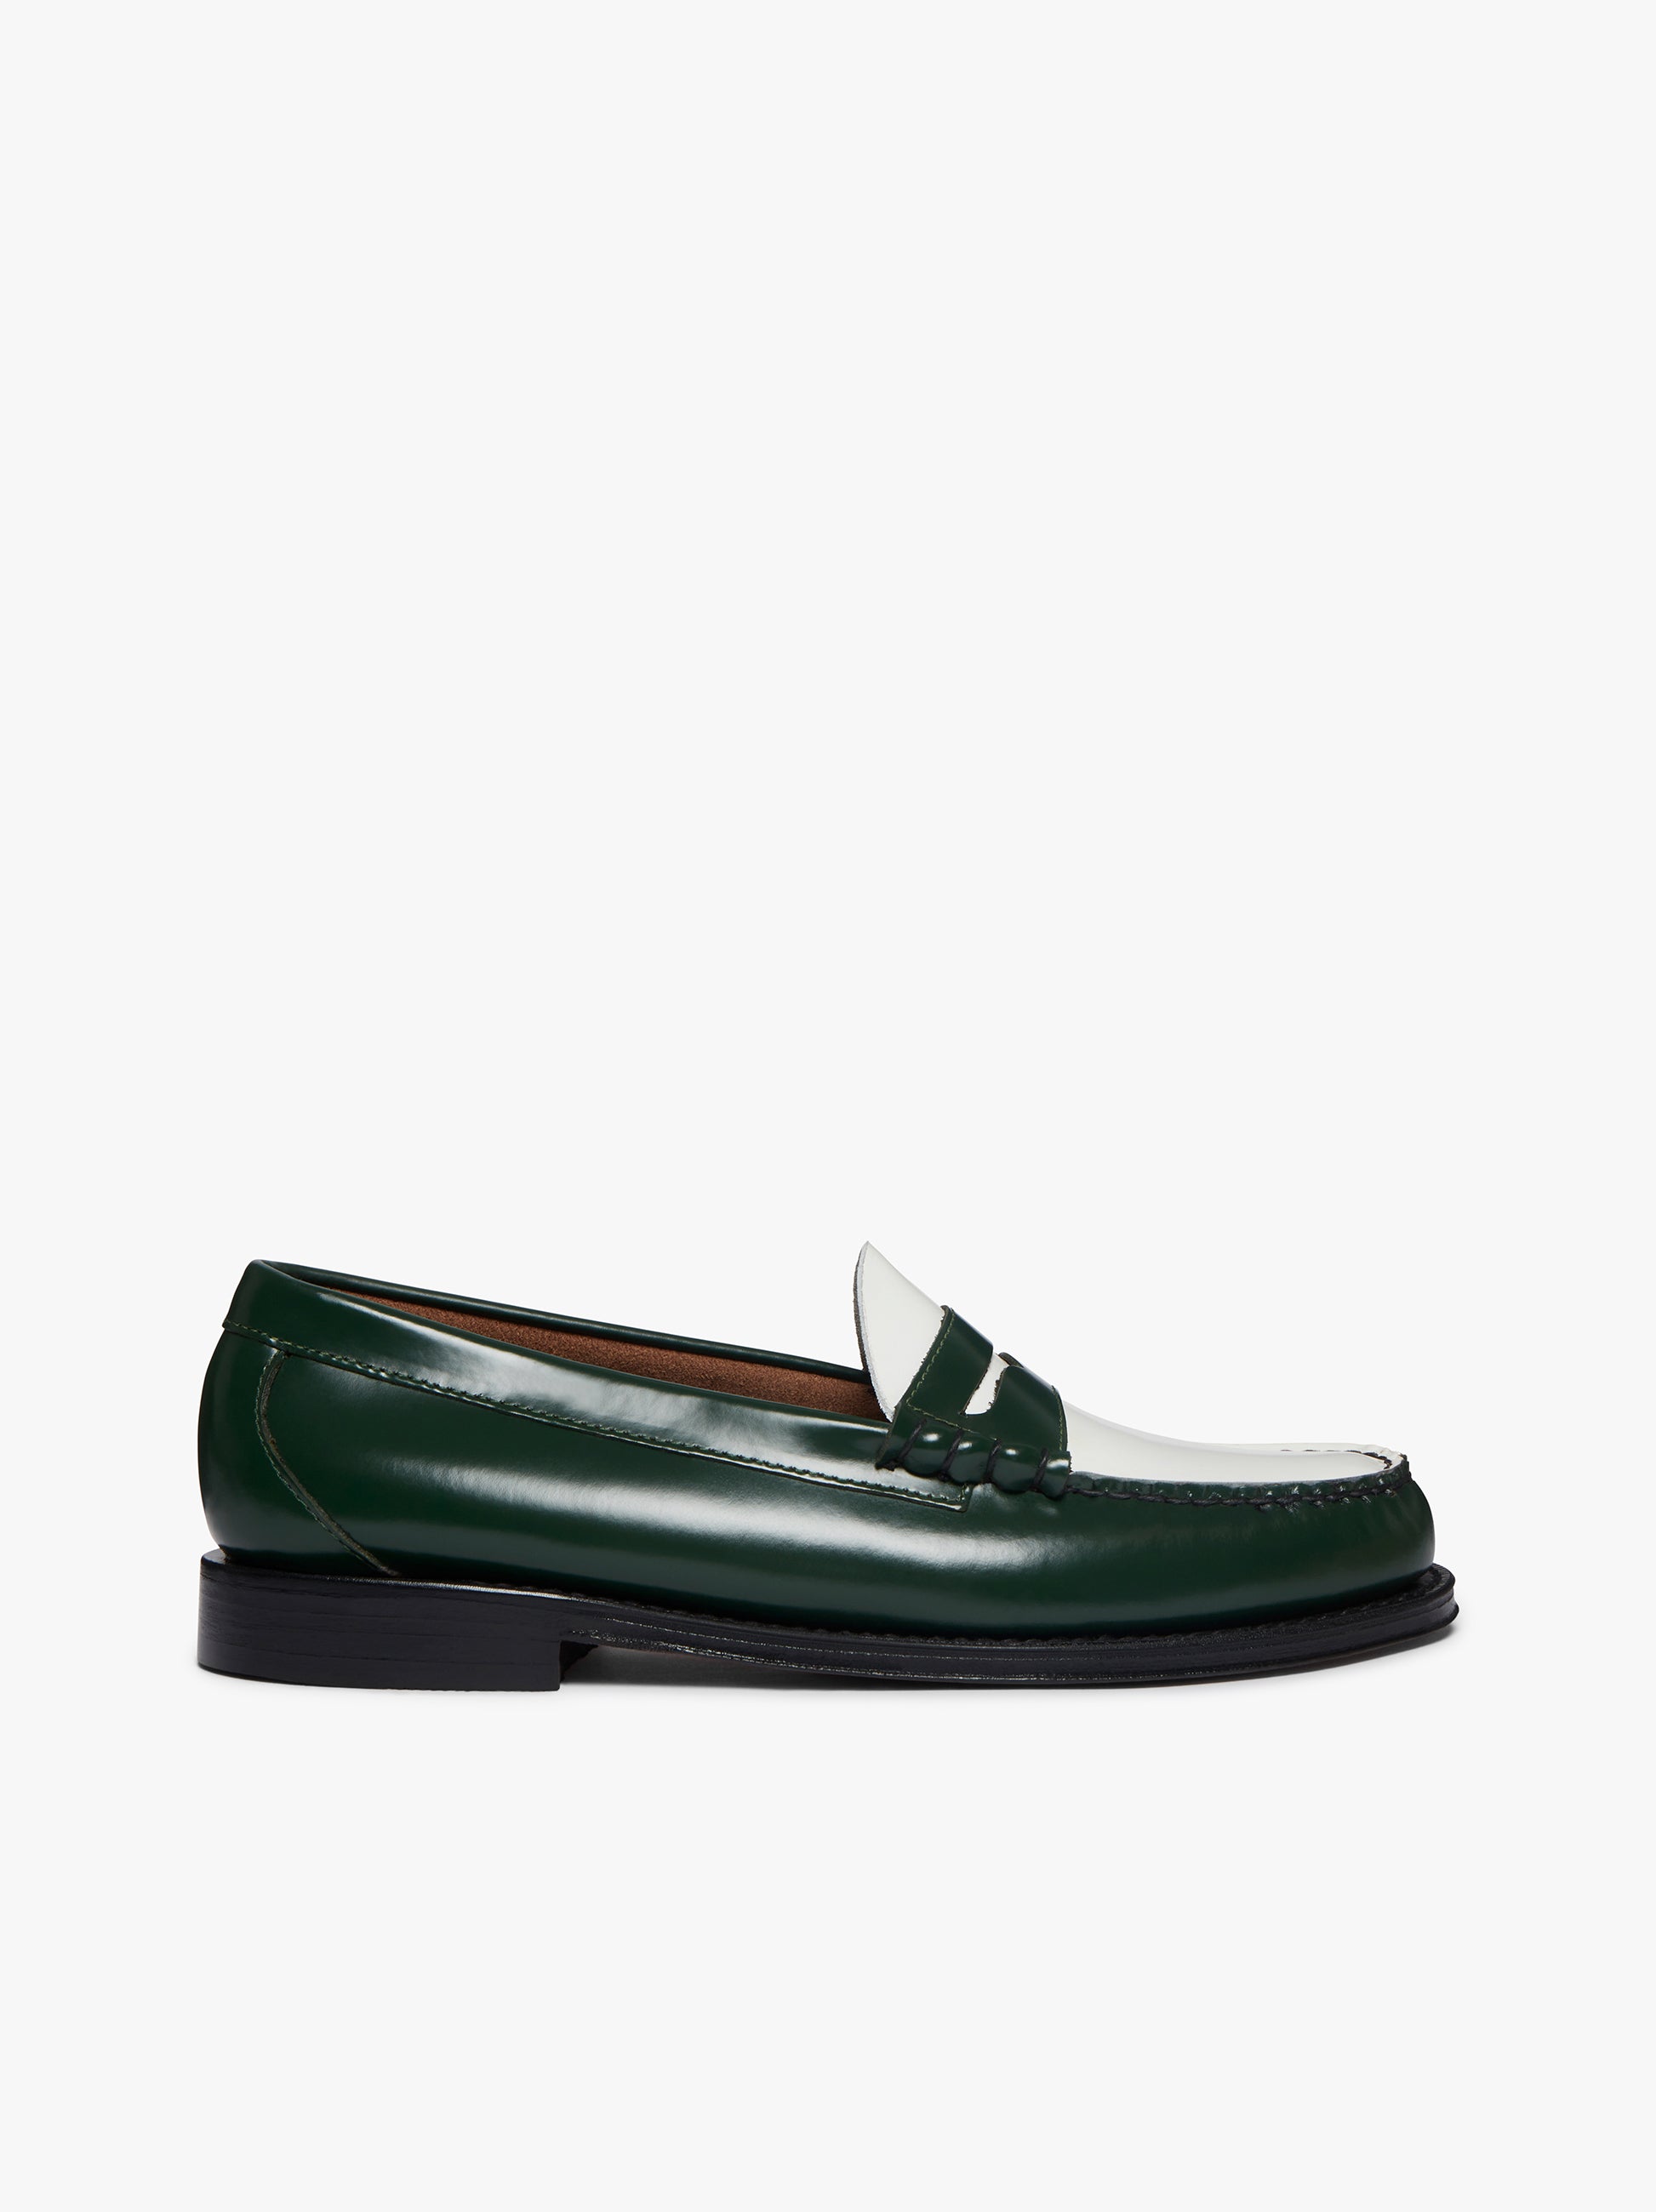 Green And White Loafers | Green And White Penny Loafers G.H.BASS